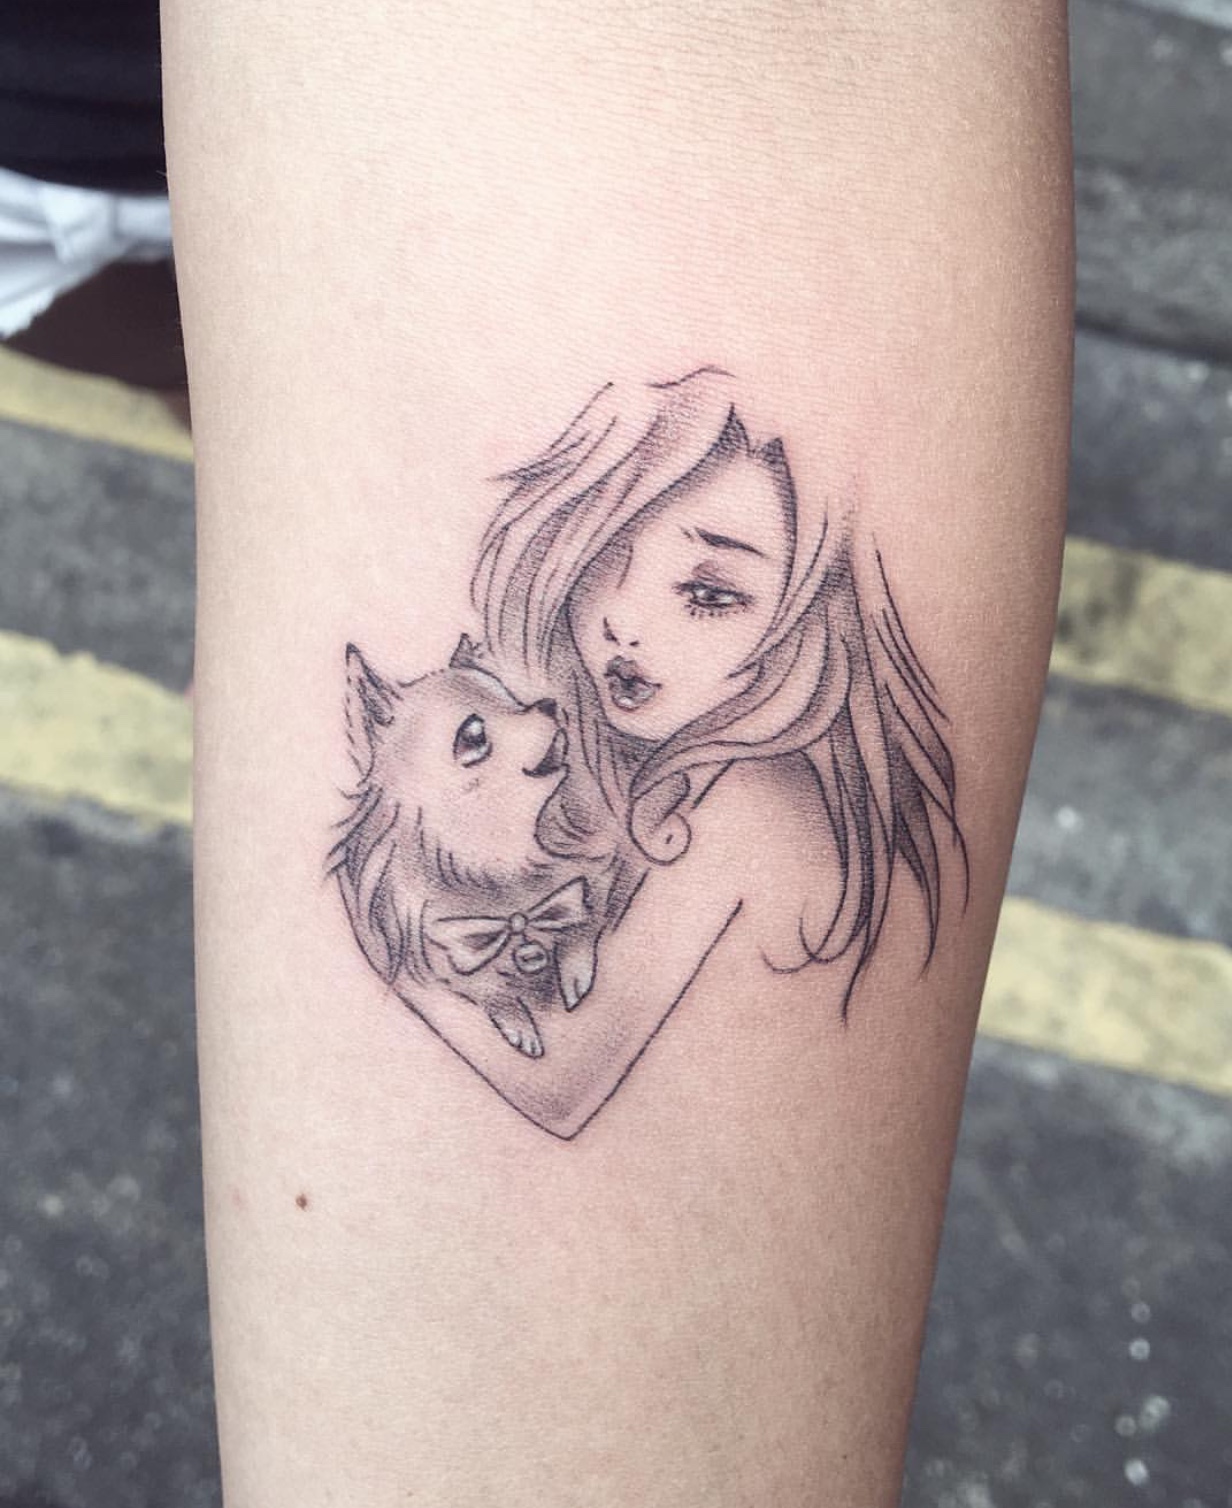 Chihuahua looking up a girl tattoo on the arm